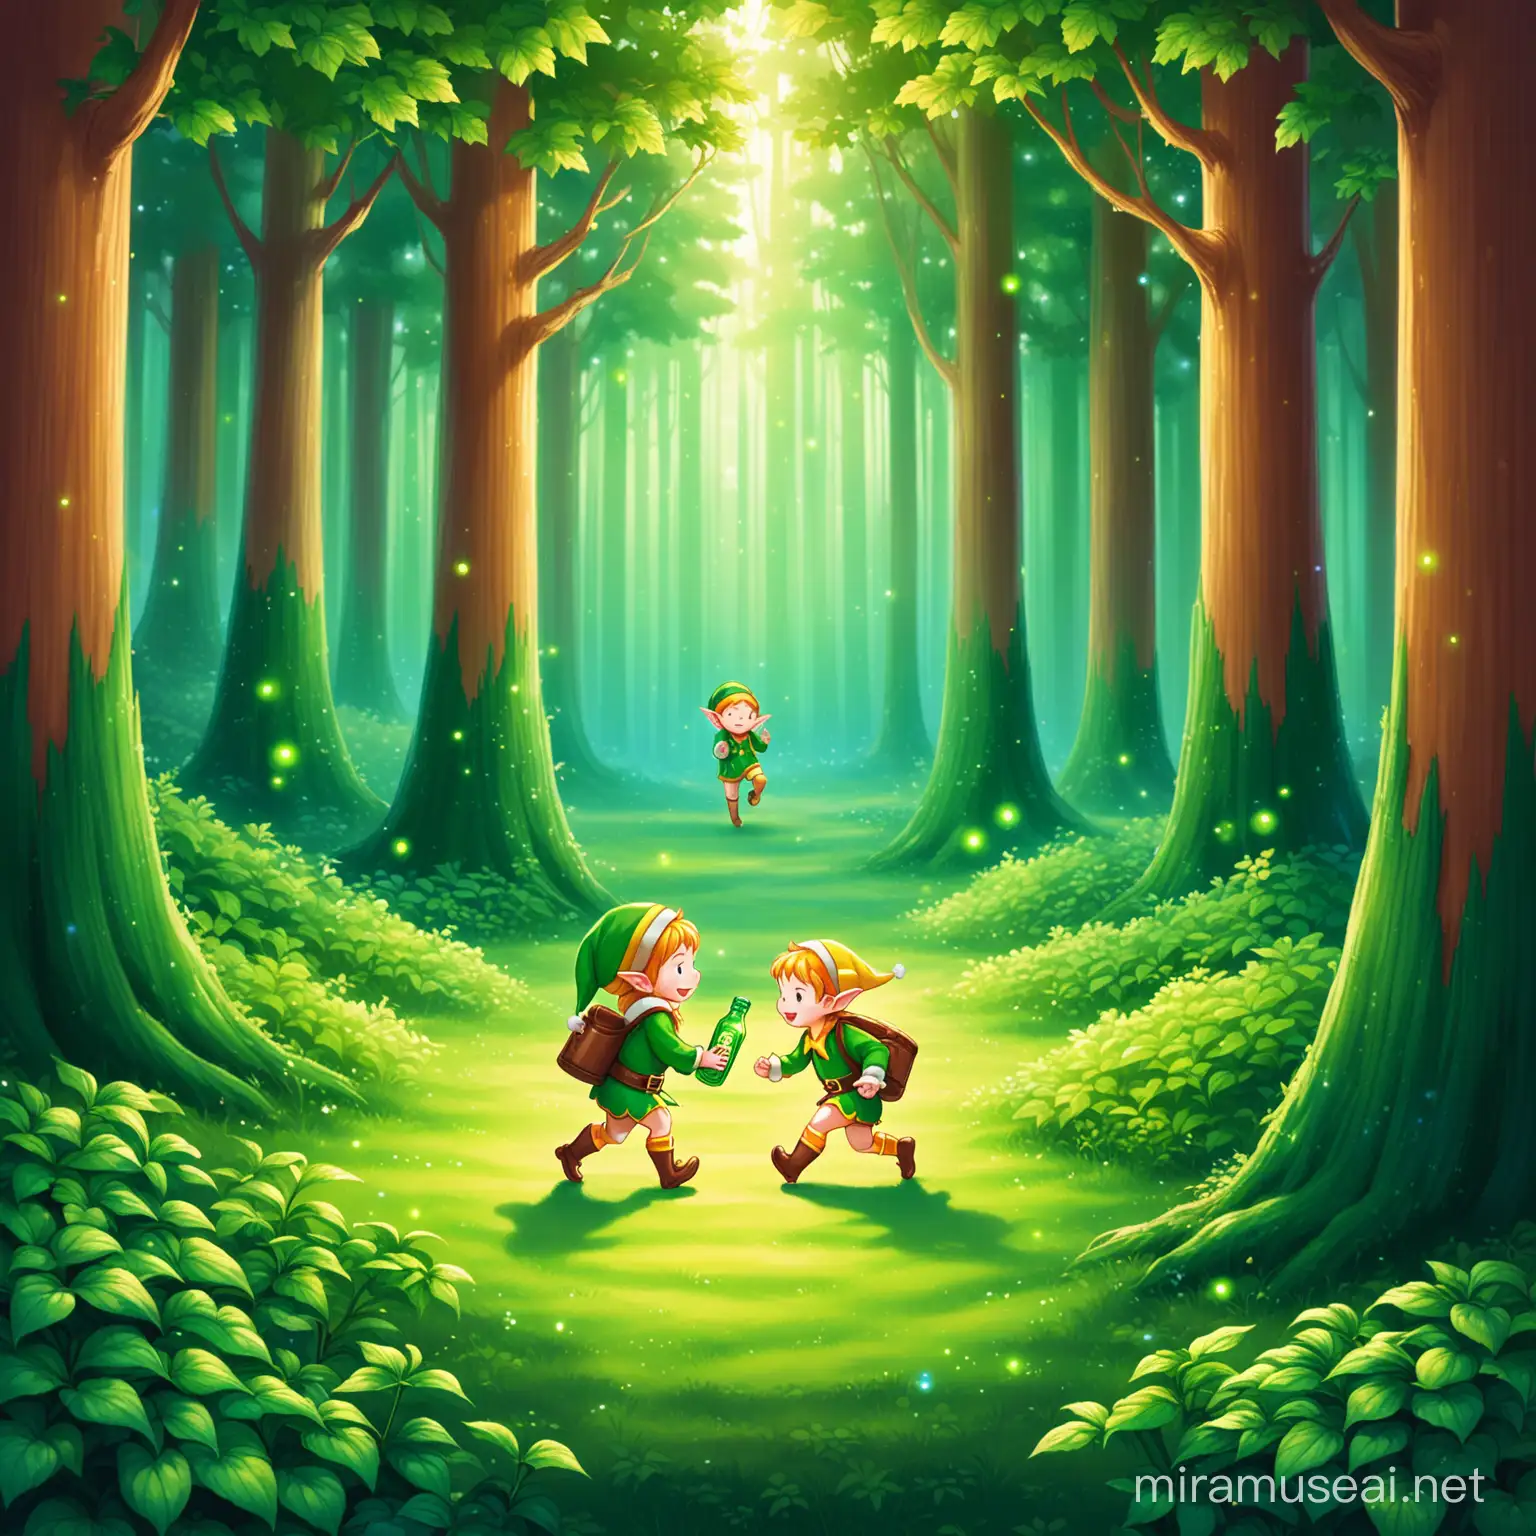 In the original forest, there are denseevergreens, and the forest is full of elves and sprites, One Sprite is sleeping in a tiny, old square, heinz glass bottle. A 5 year old girl and 2 year old boy find the small bottle. They cannot see the mischievious sprint as he is invisible